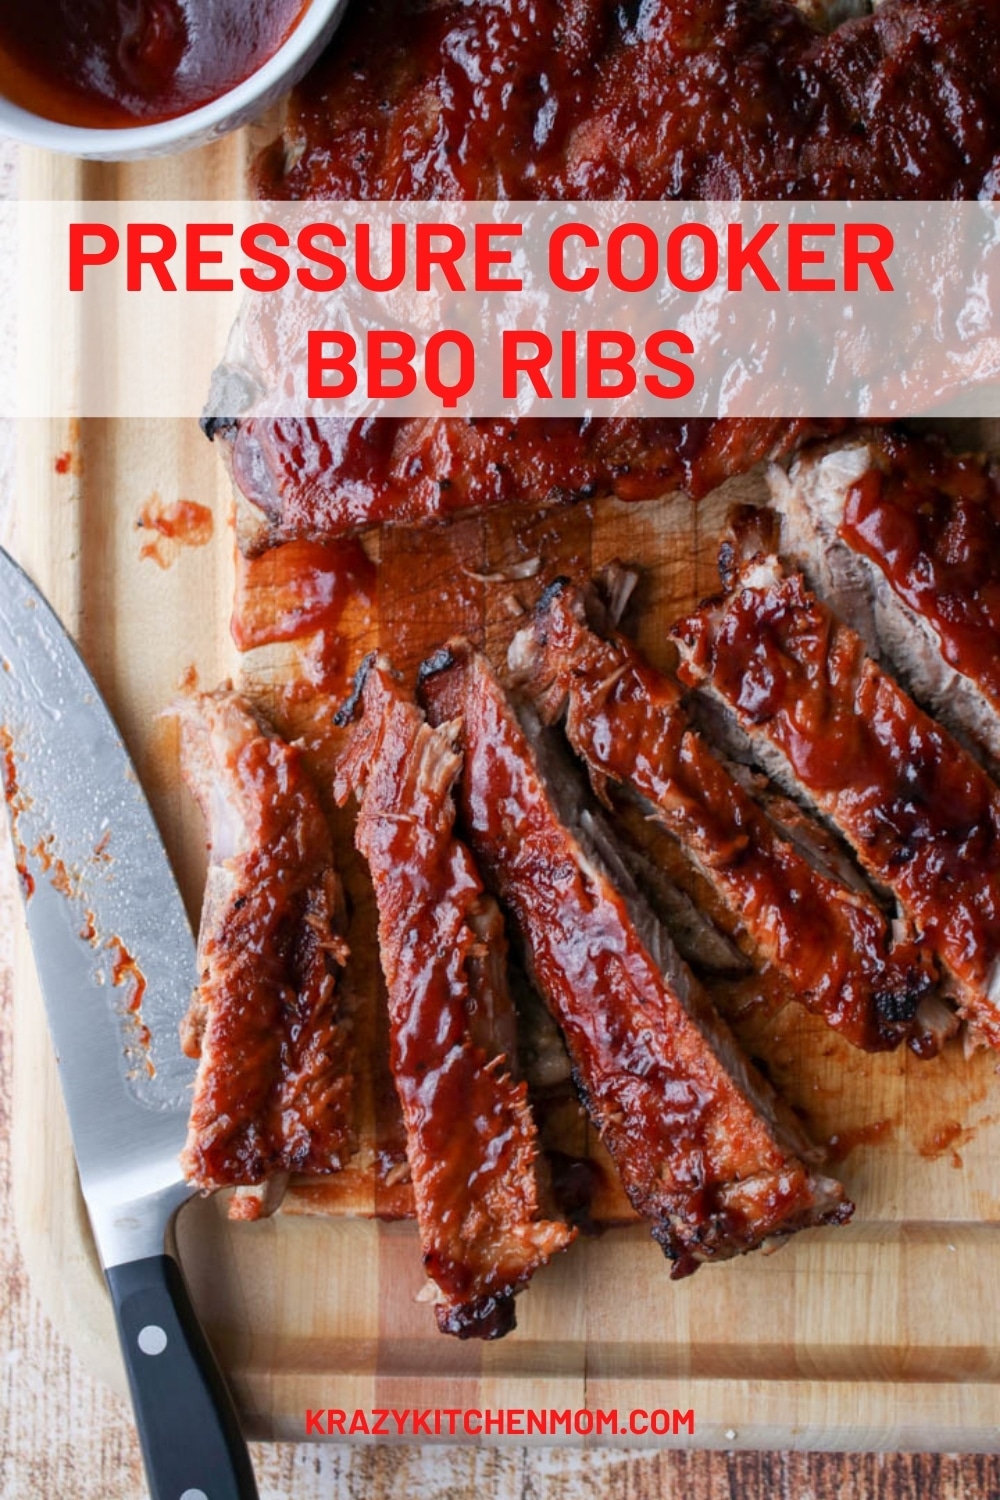 Tender, juicy, fall-off-the-bone, finger-licking ribs in less than 30 minutes made in a pressure cooker. Perfect for any weeknight dinner. via @krazykitchenmom